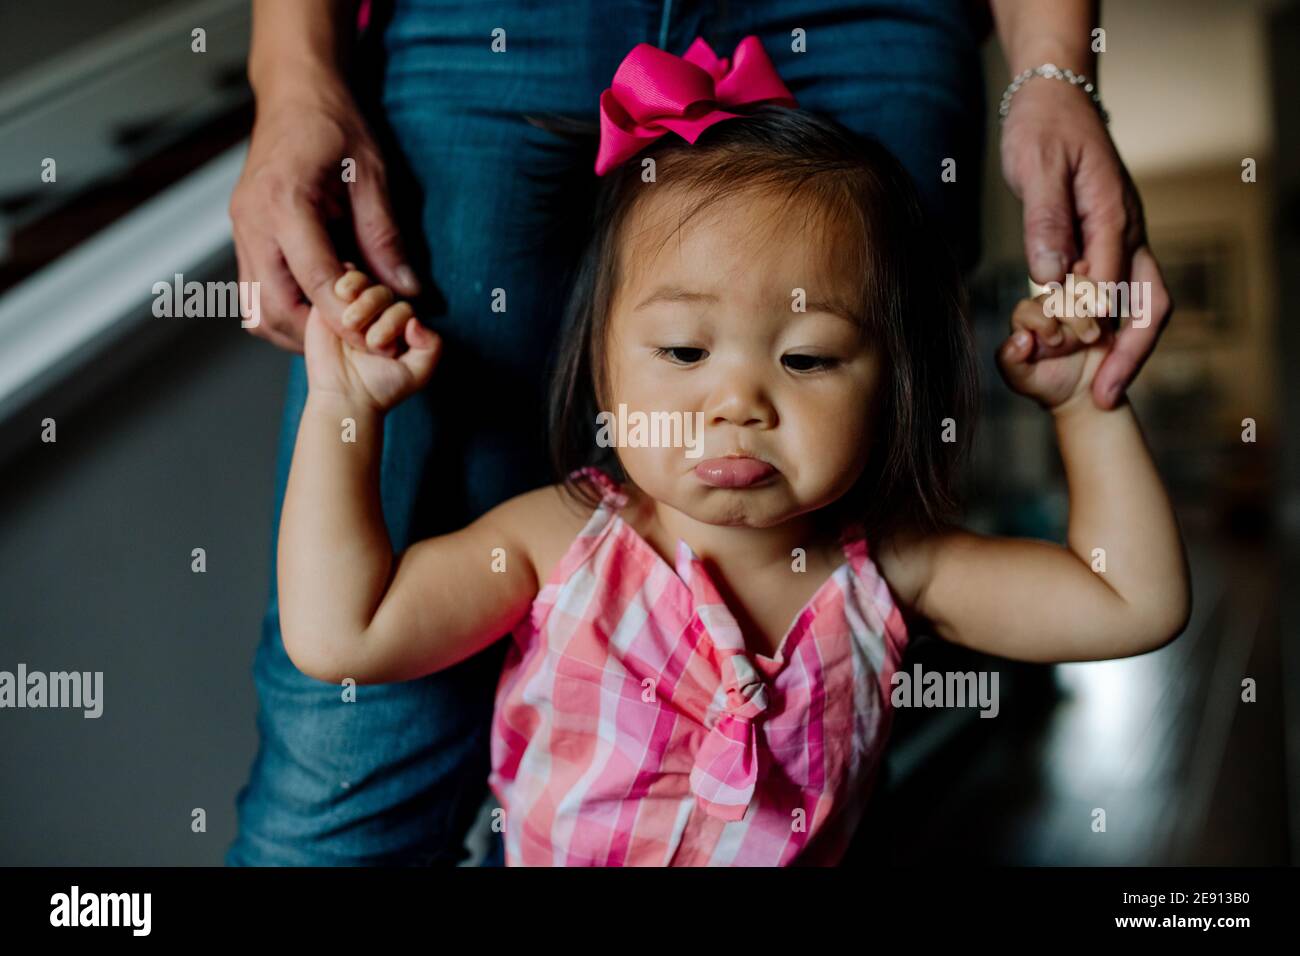 Pouting asian toddler with pink bow in hair learning to walk Stock Photo